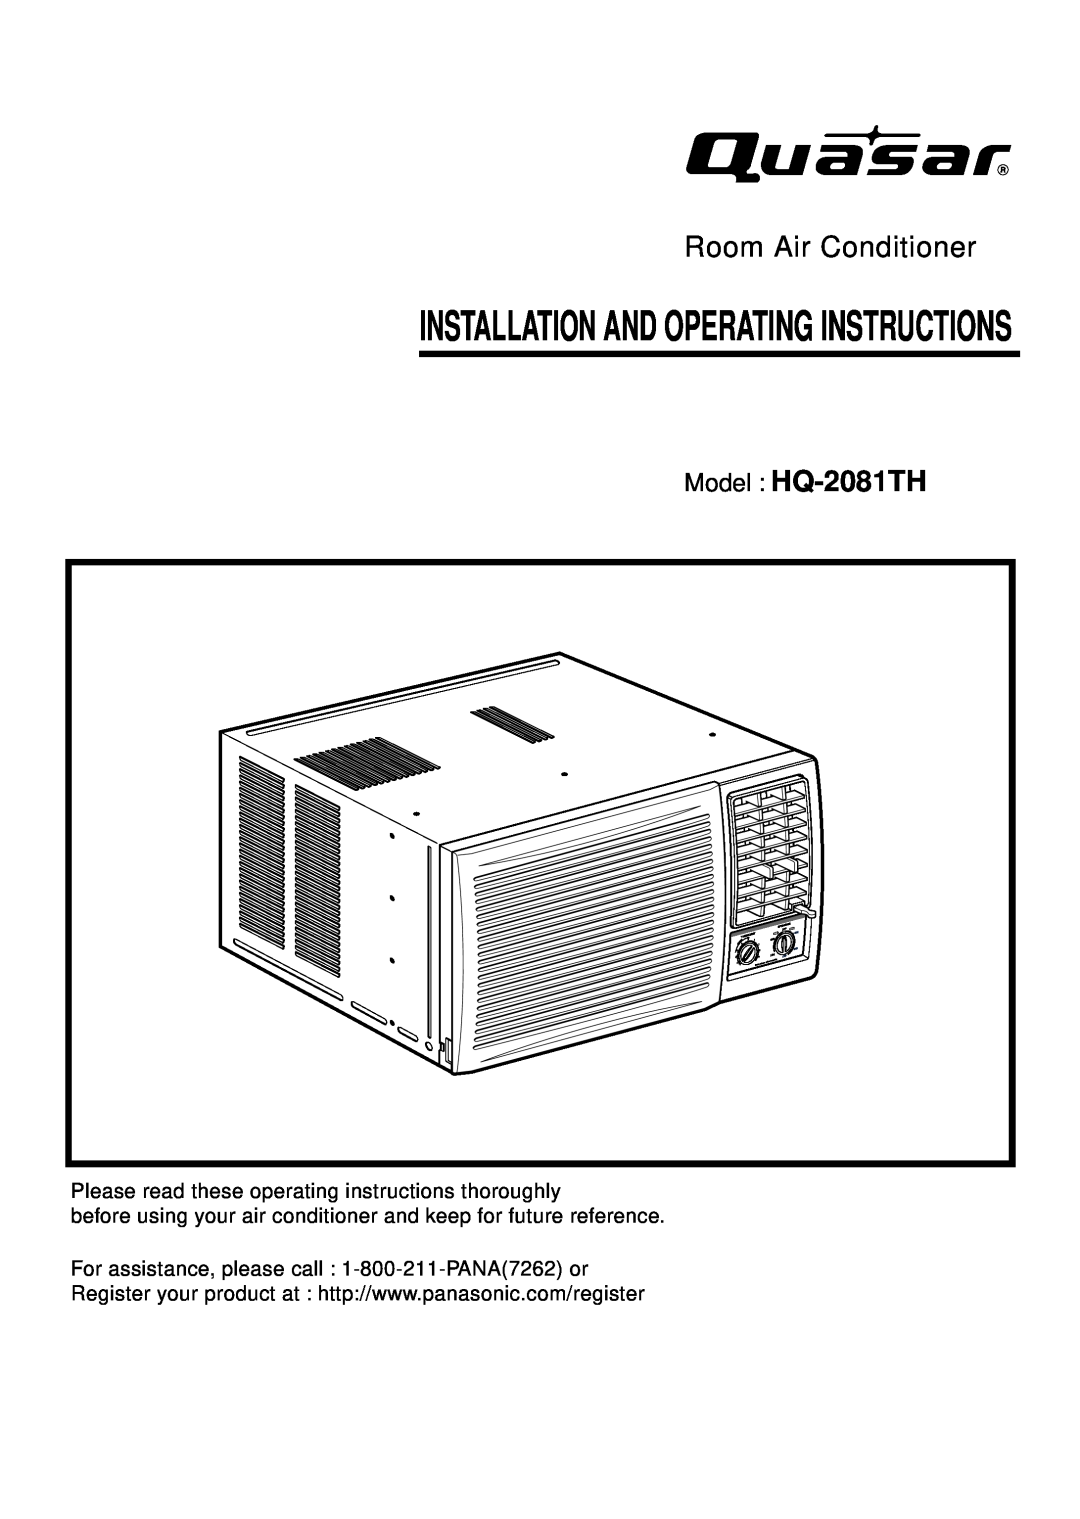 Quasar manual Model HQ-2081TH, Installation And Operating Instructions, Room Air Conditioner 